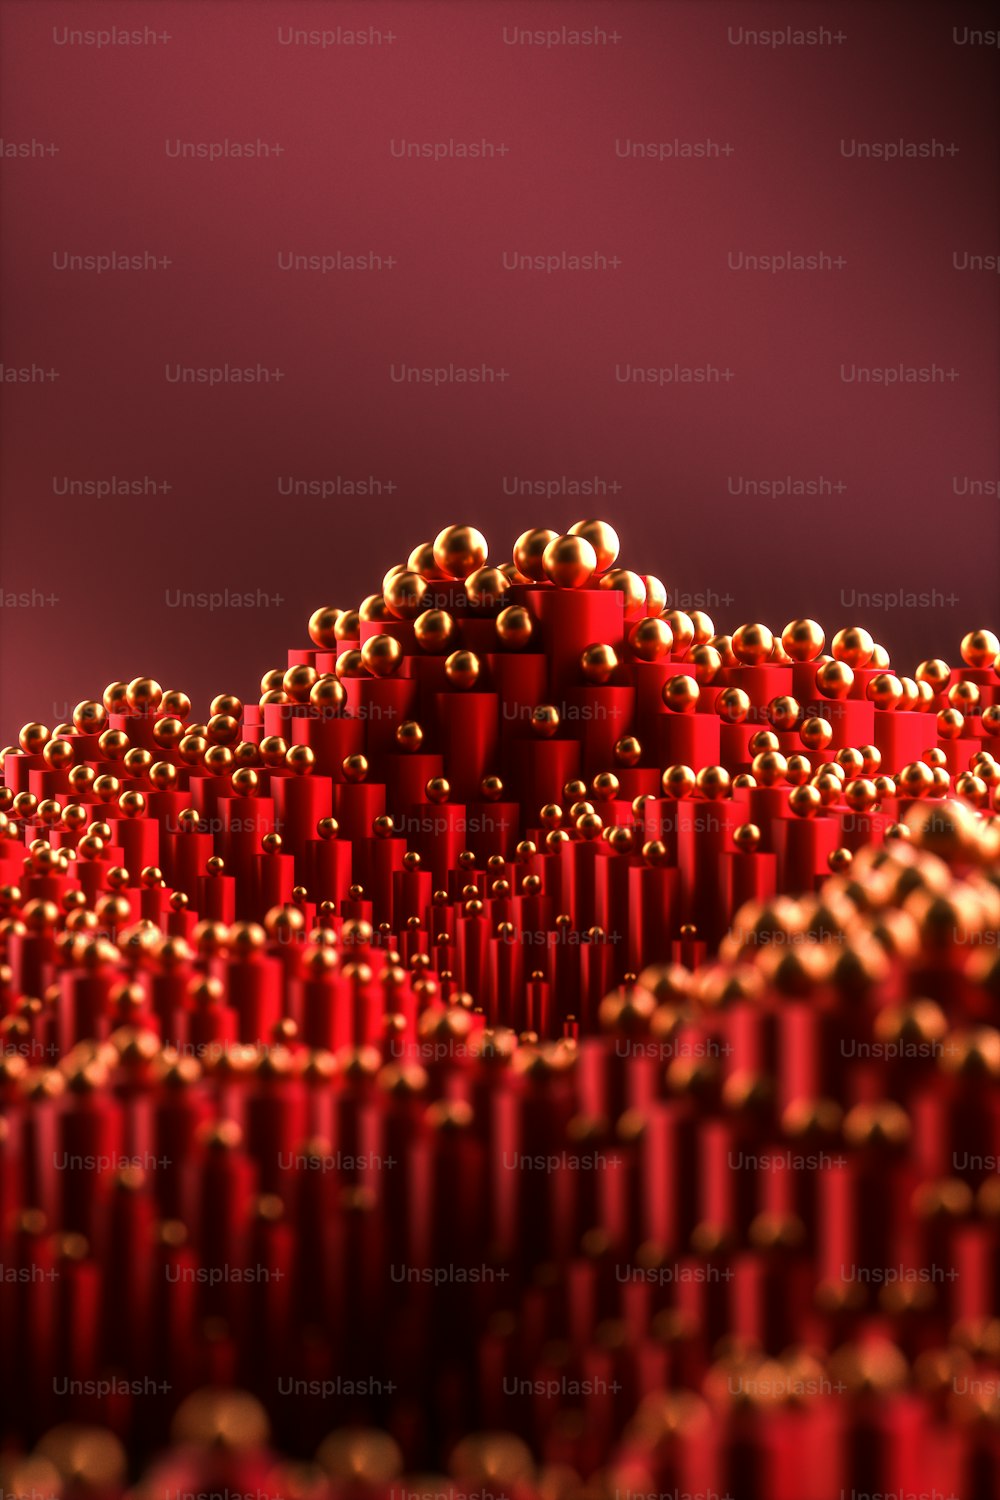 a large number of red objects in a room